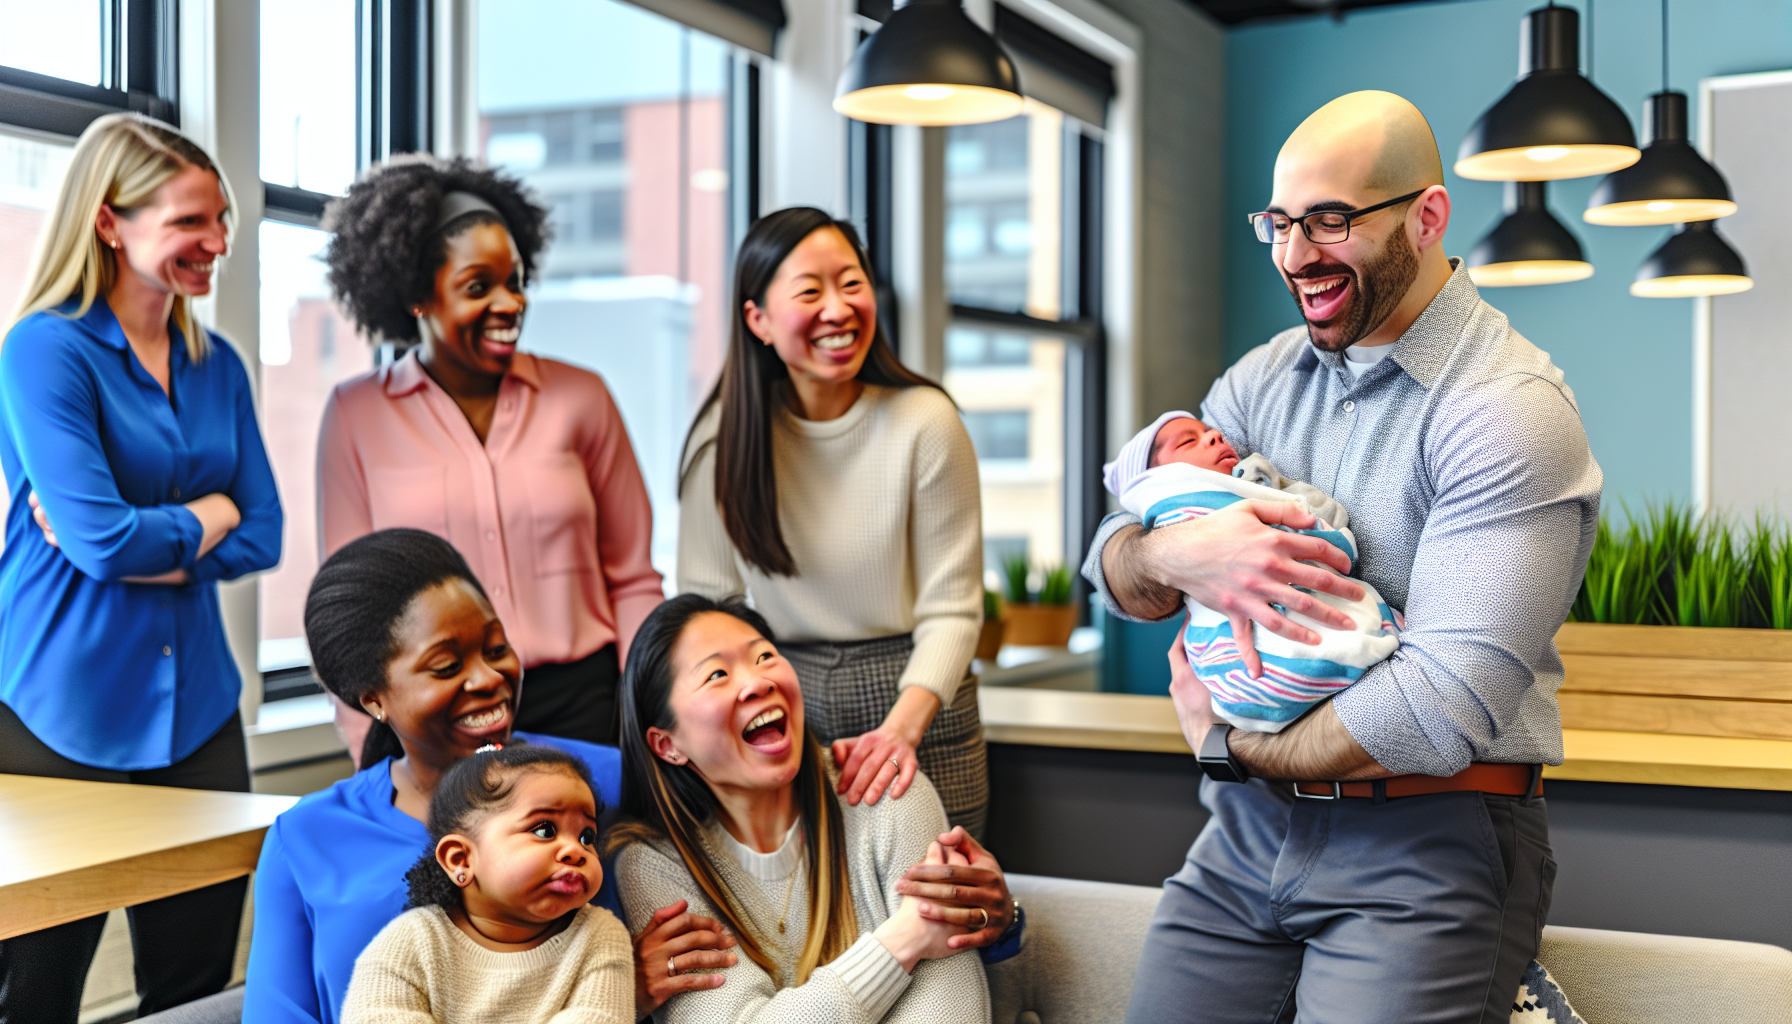 A new parent holding a baby with colleagues offering support in Oshkosh, WI